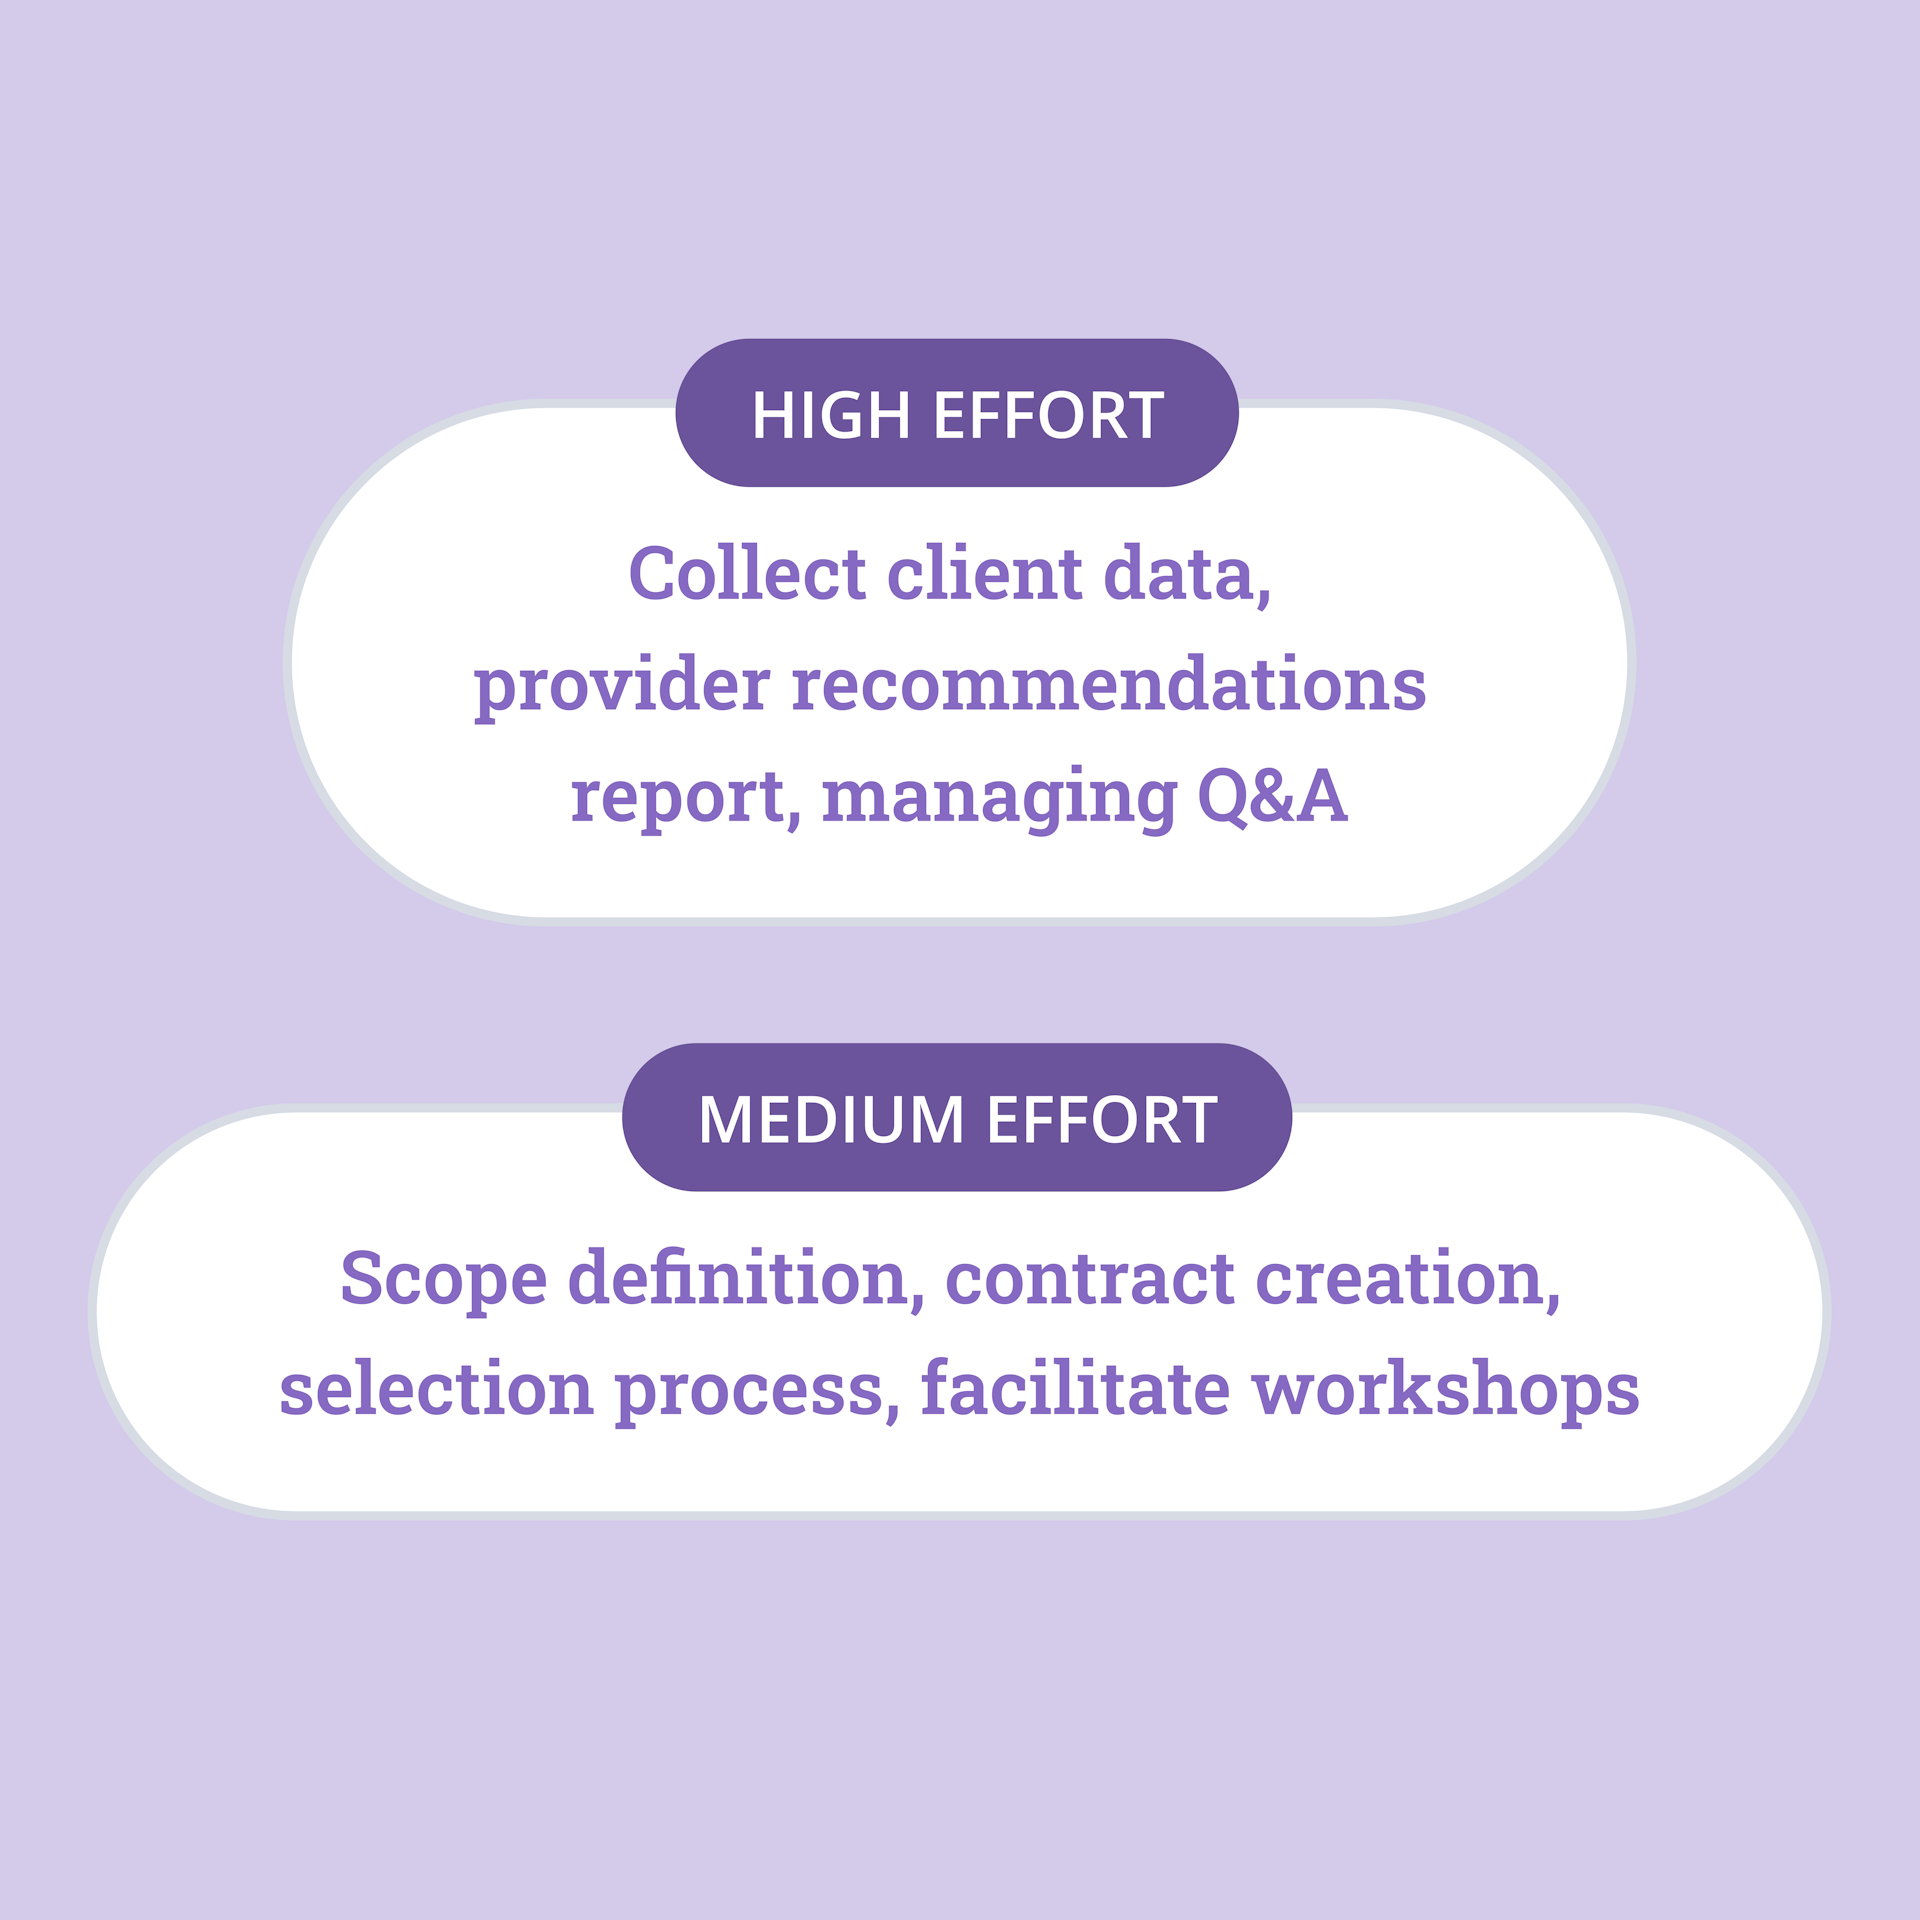 Text on a lilac background, explaining high effort and medium effort activities. 